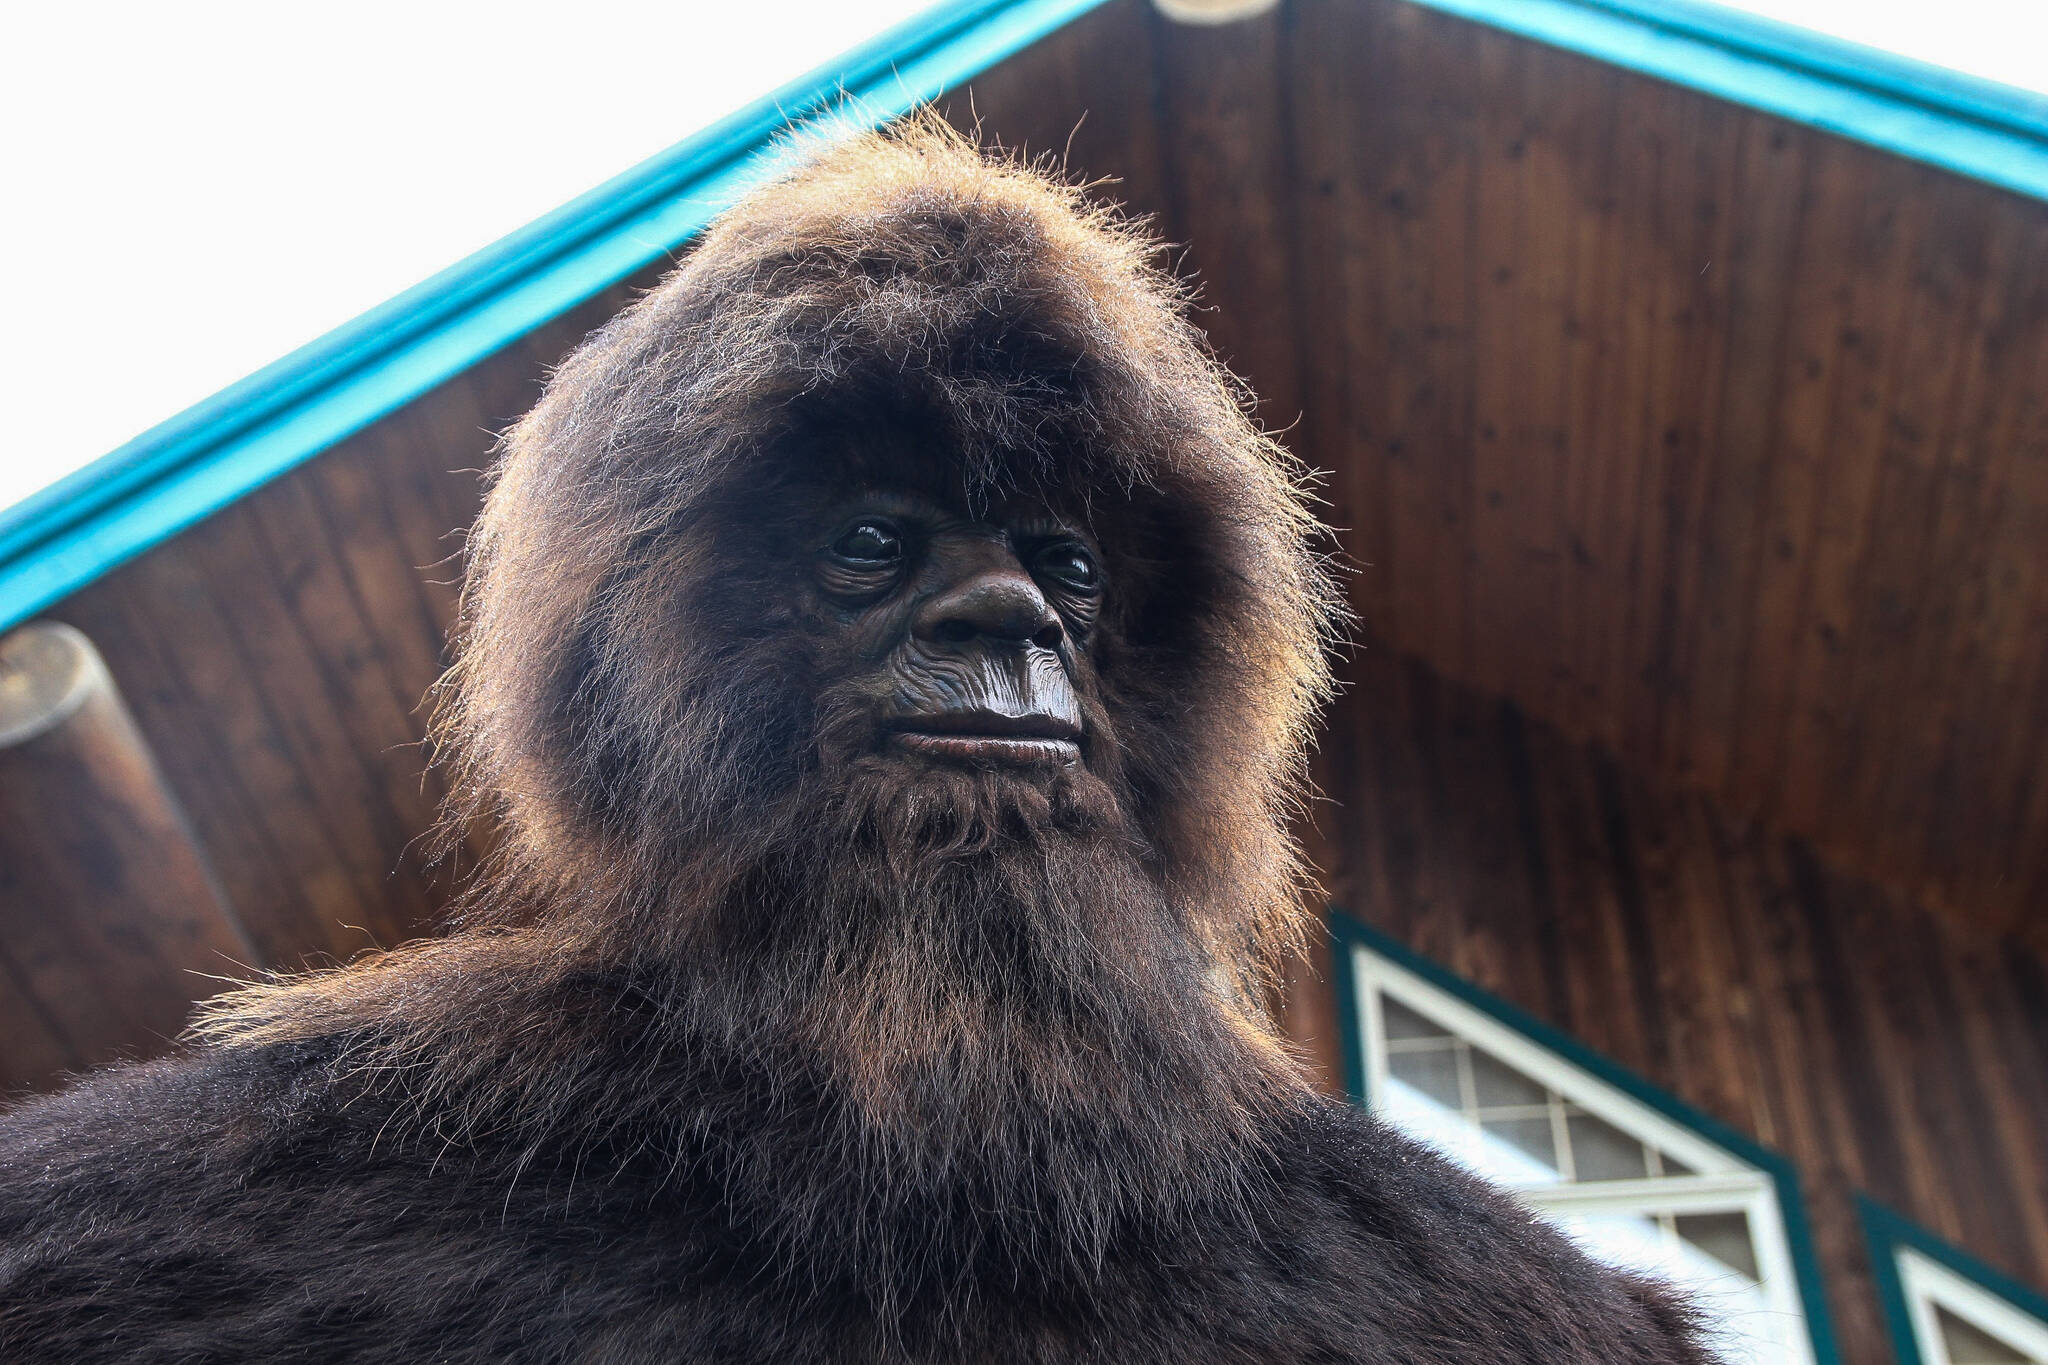 Meaker said Squatchy’s face was constructed by an artist in Brazil. (Photo by Luisa Loi/Whidbey News-Times)